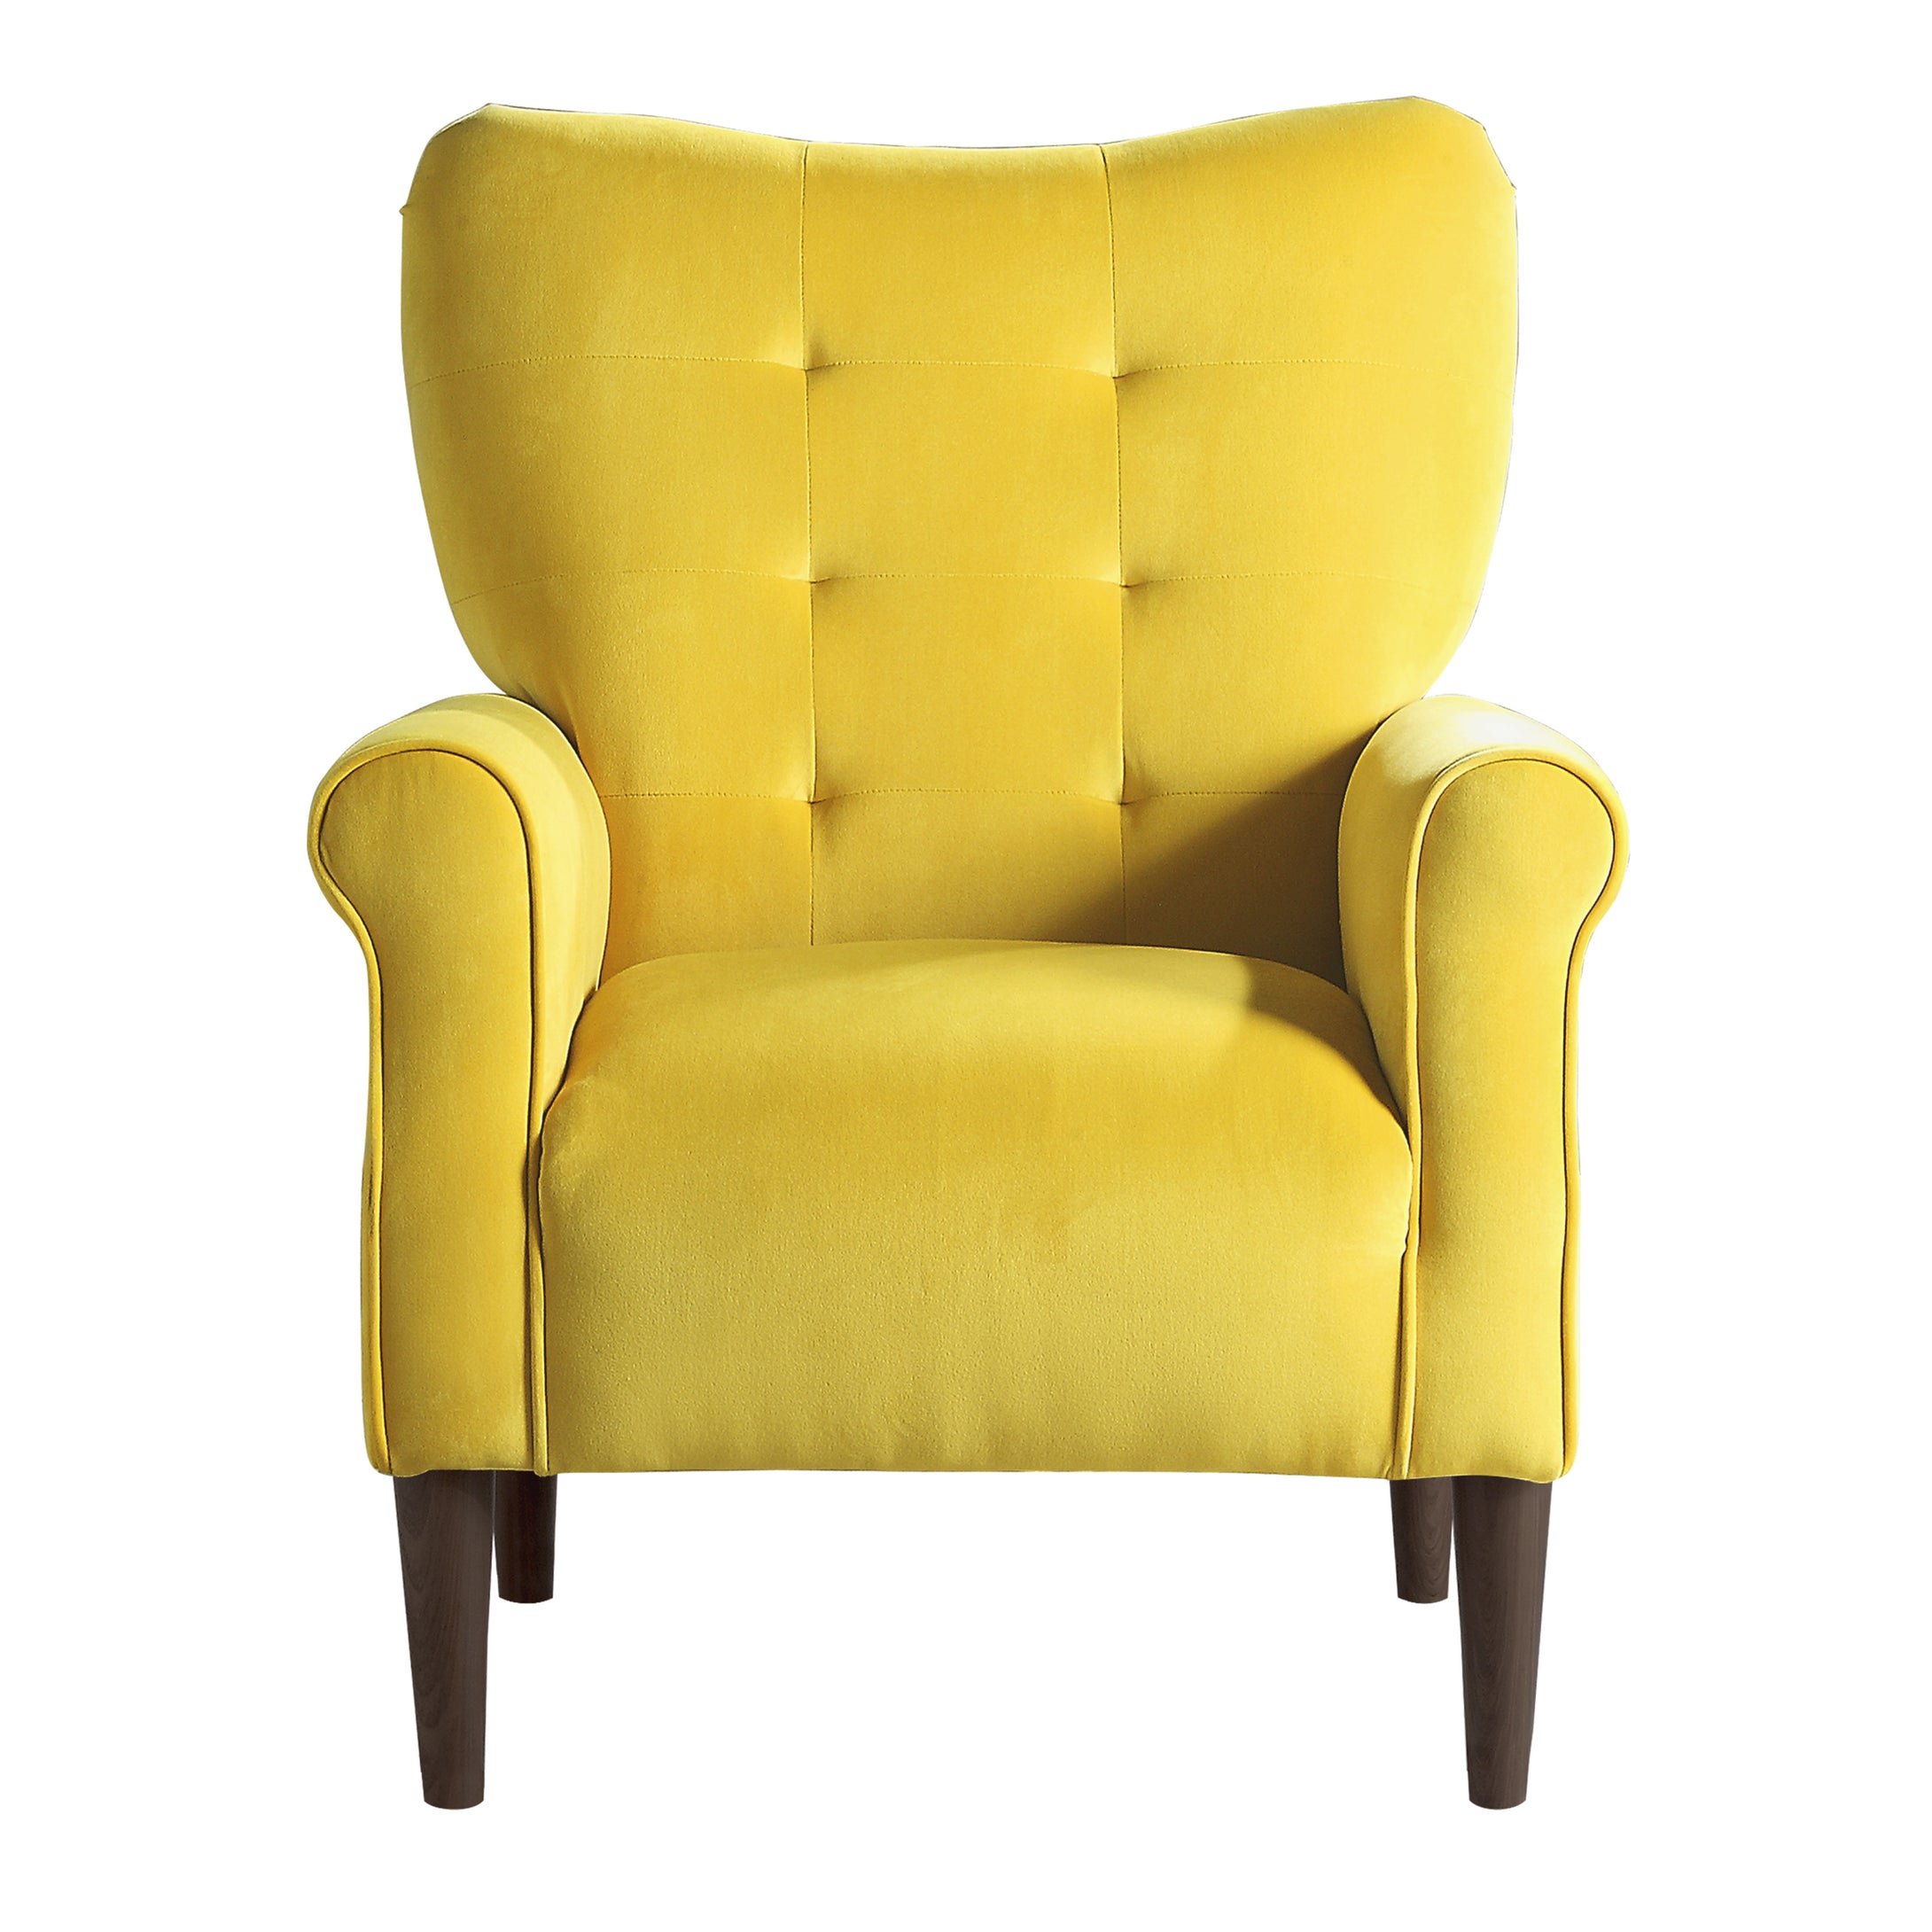 1046YW-1 Accent Chair